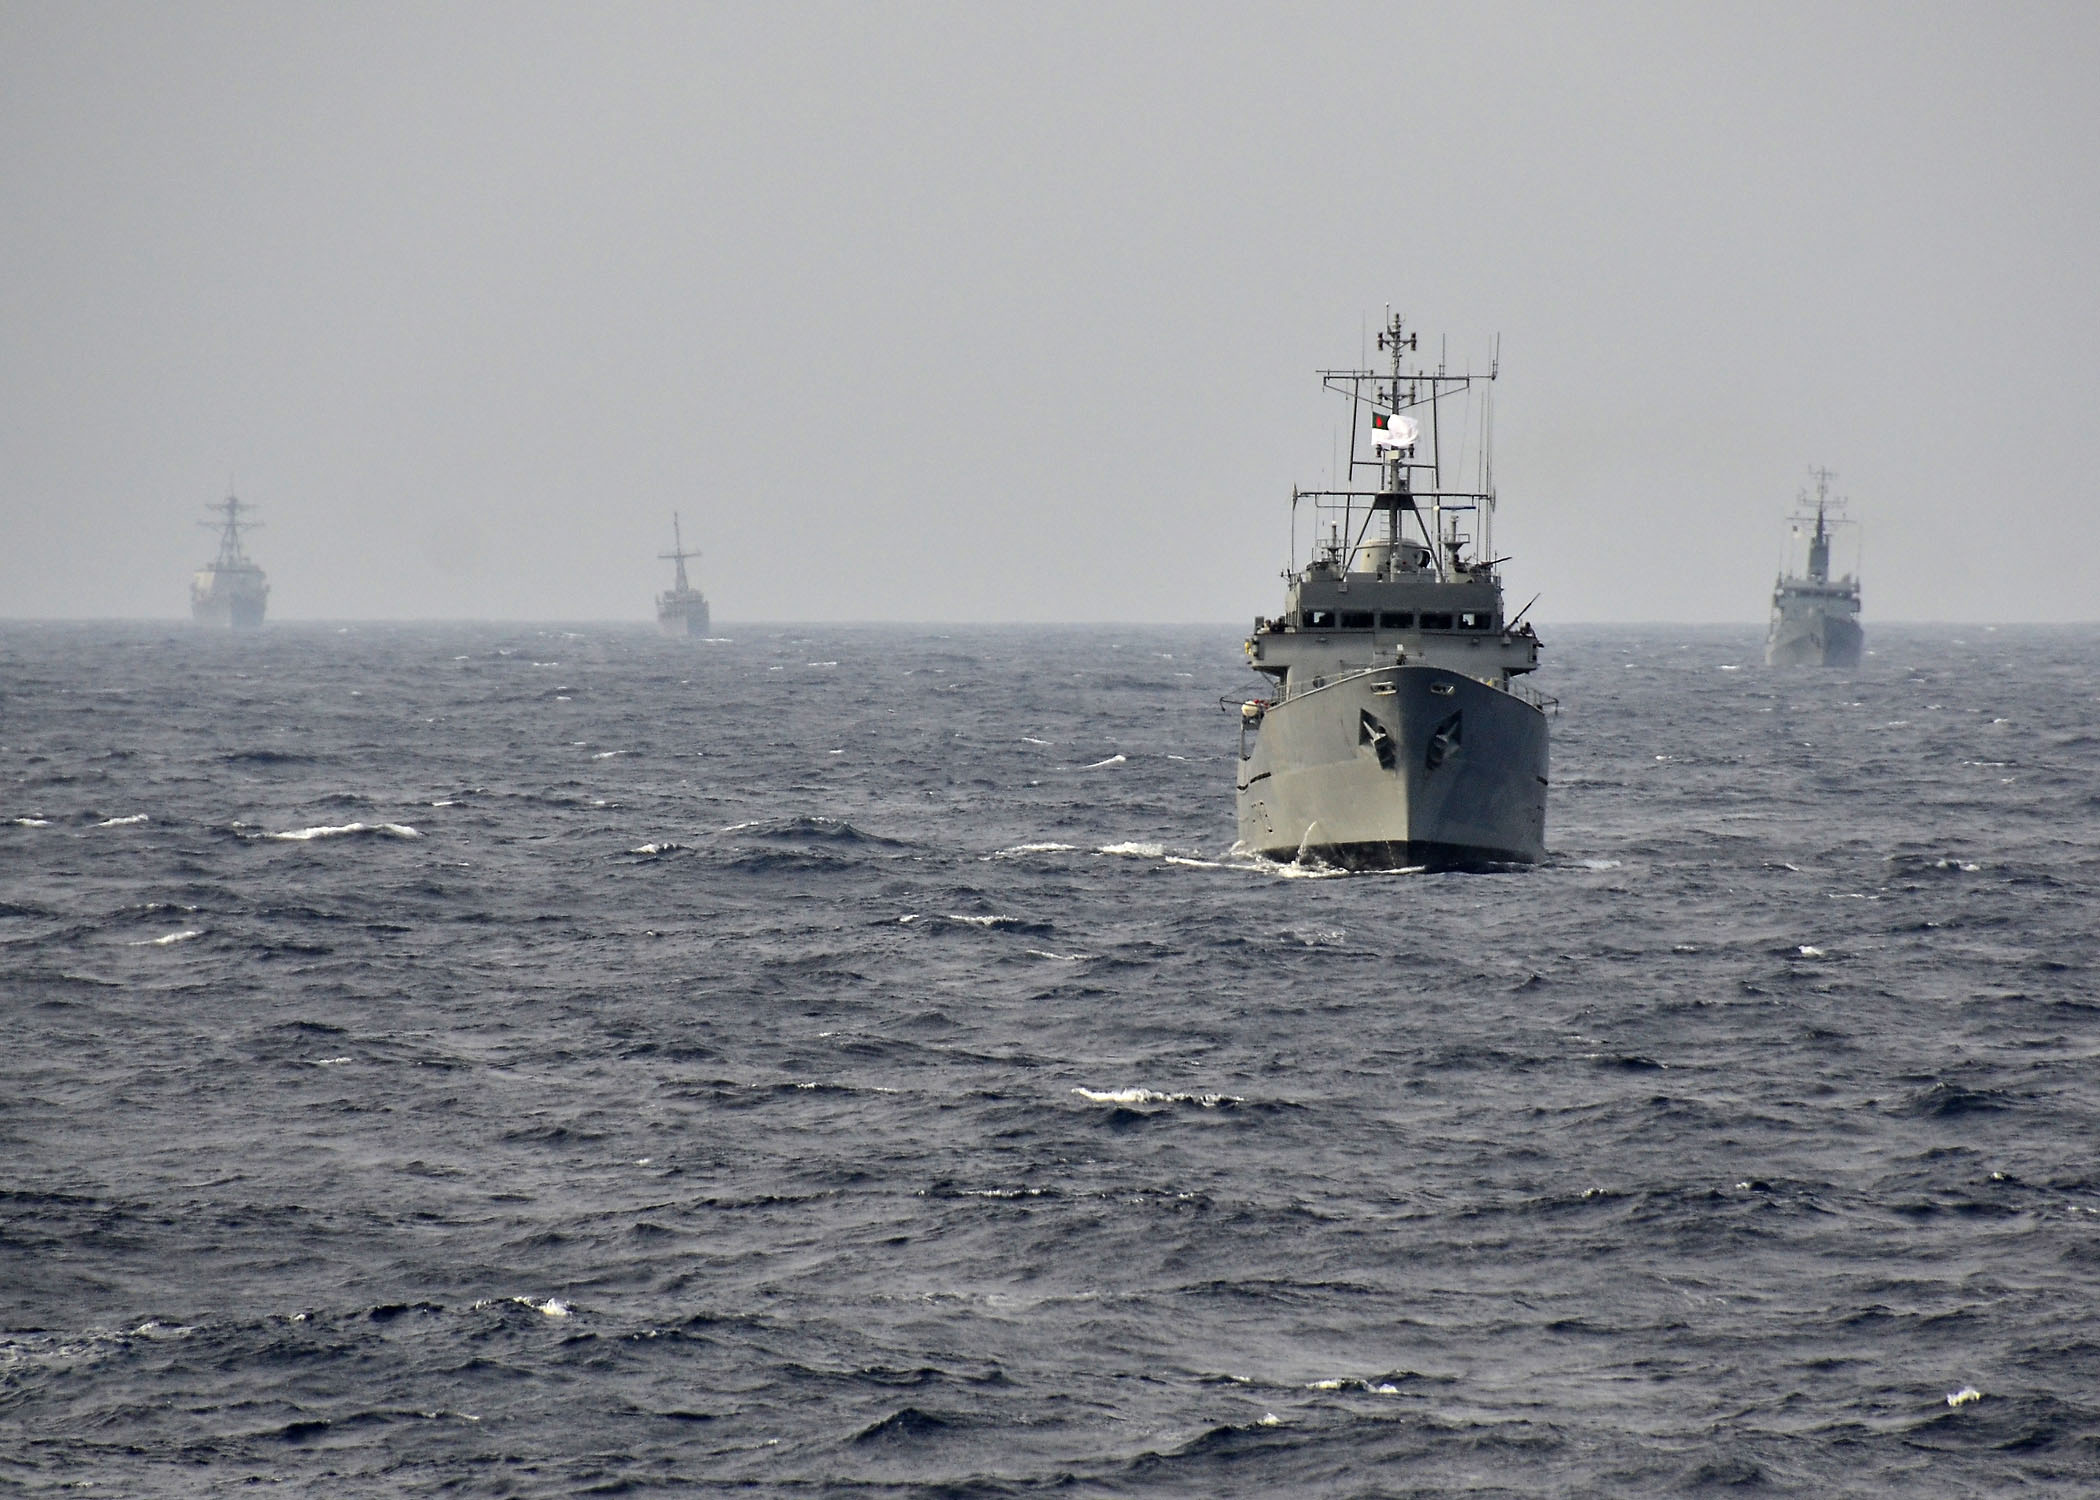 US_Navy_110922-N-RI844-021_Bangladesh_navy_and_U.S._Navy_ships_participate_in_a_surface_gunnery_exercise_during_Cooperation_Afloat_Readiness_and_Tr.jpg